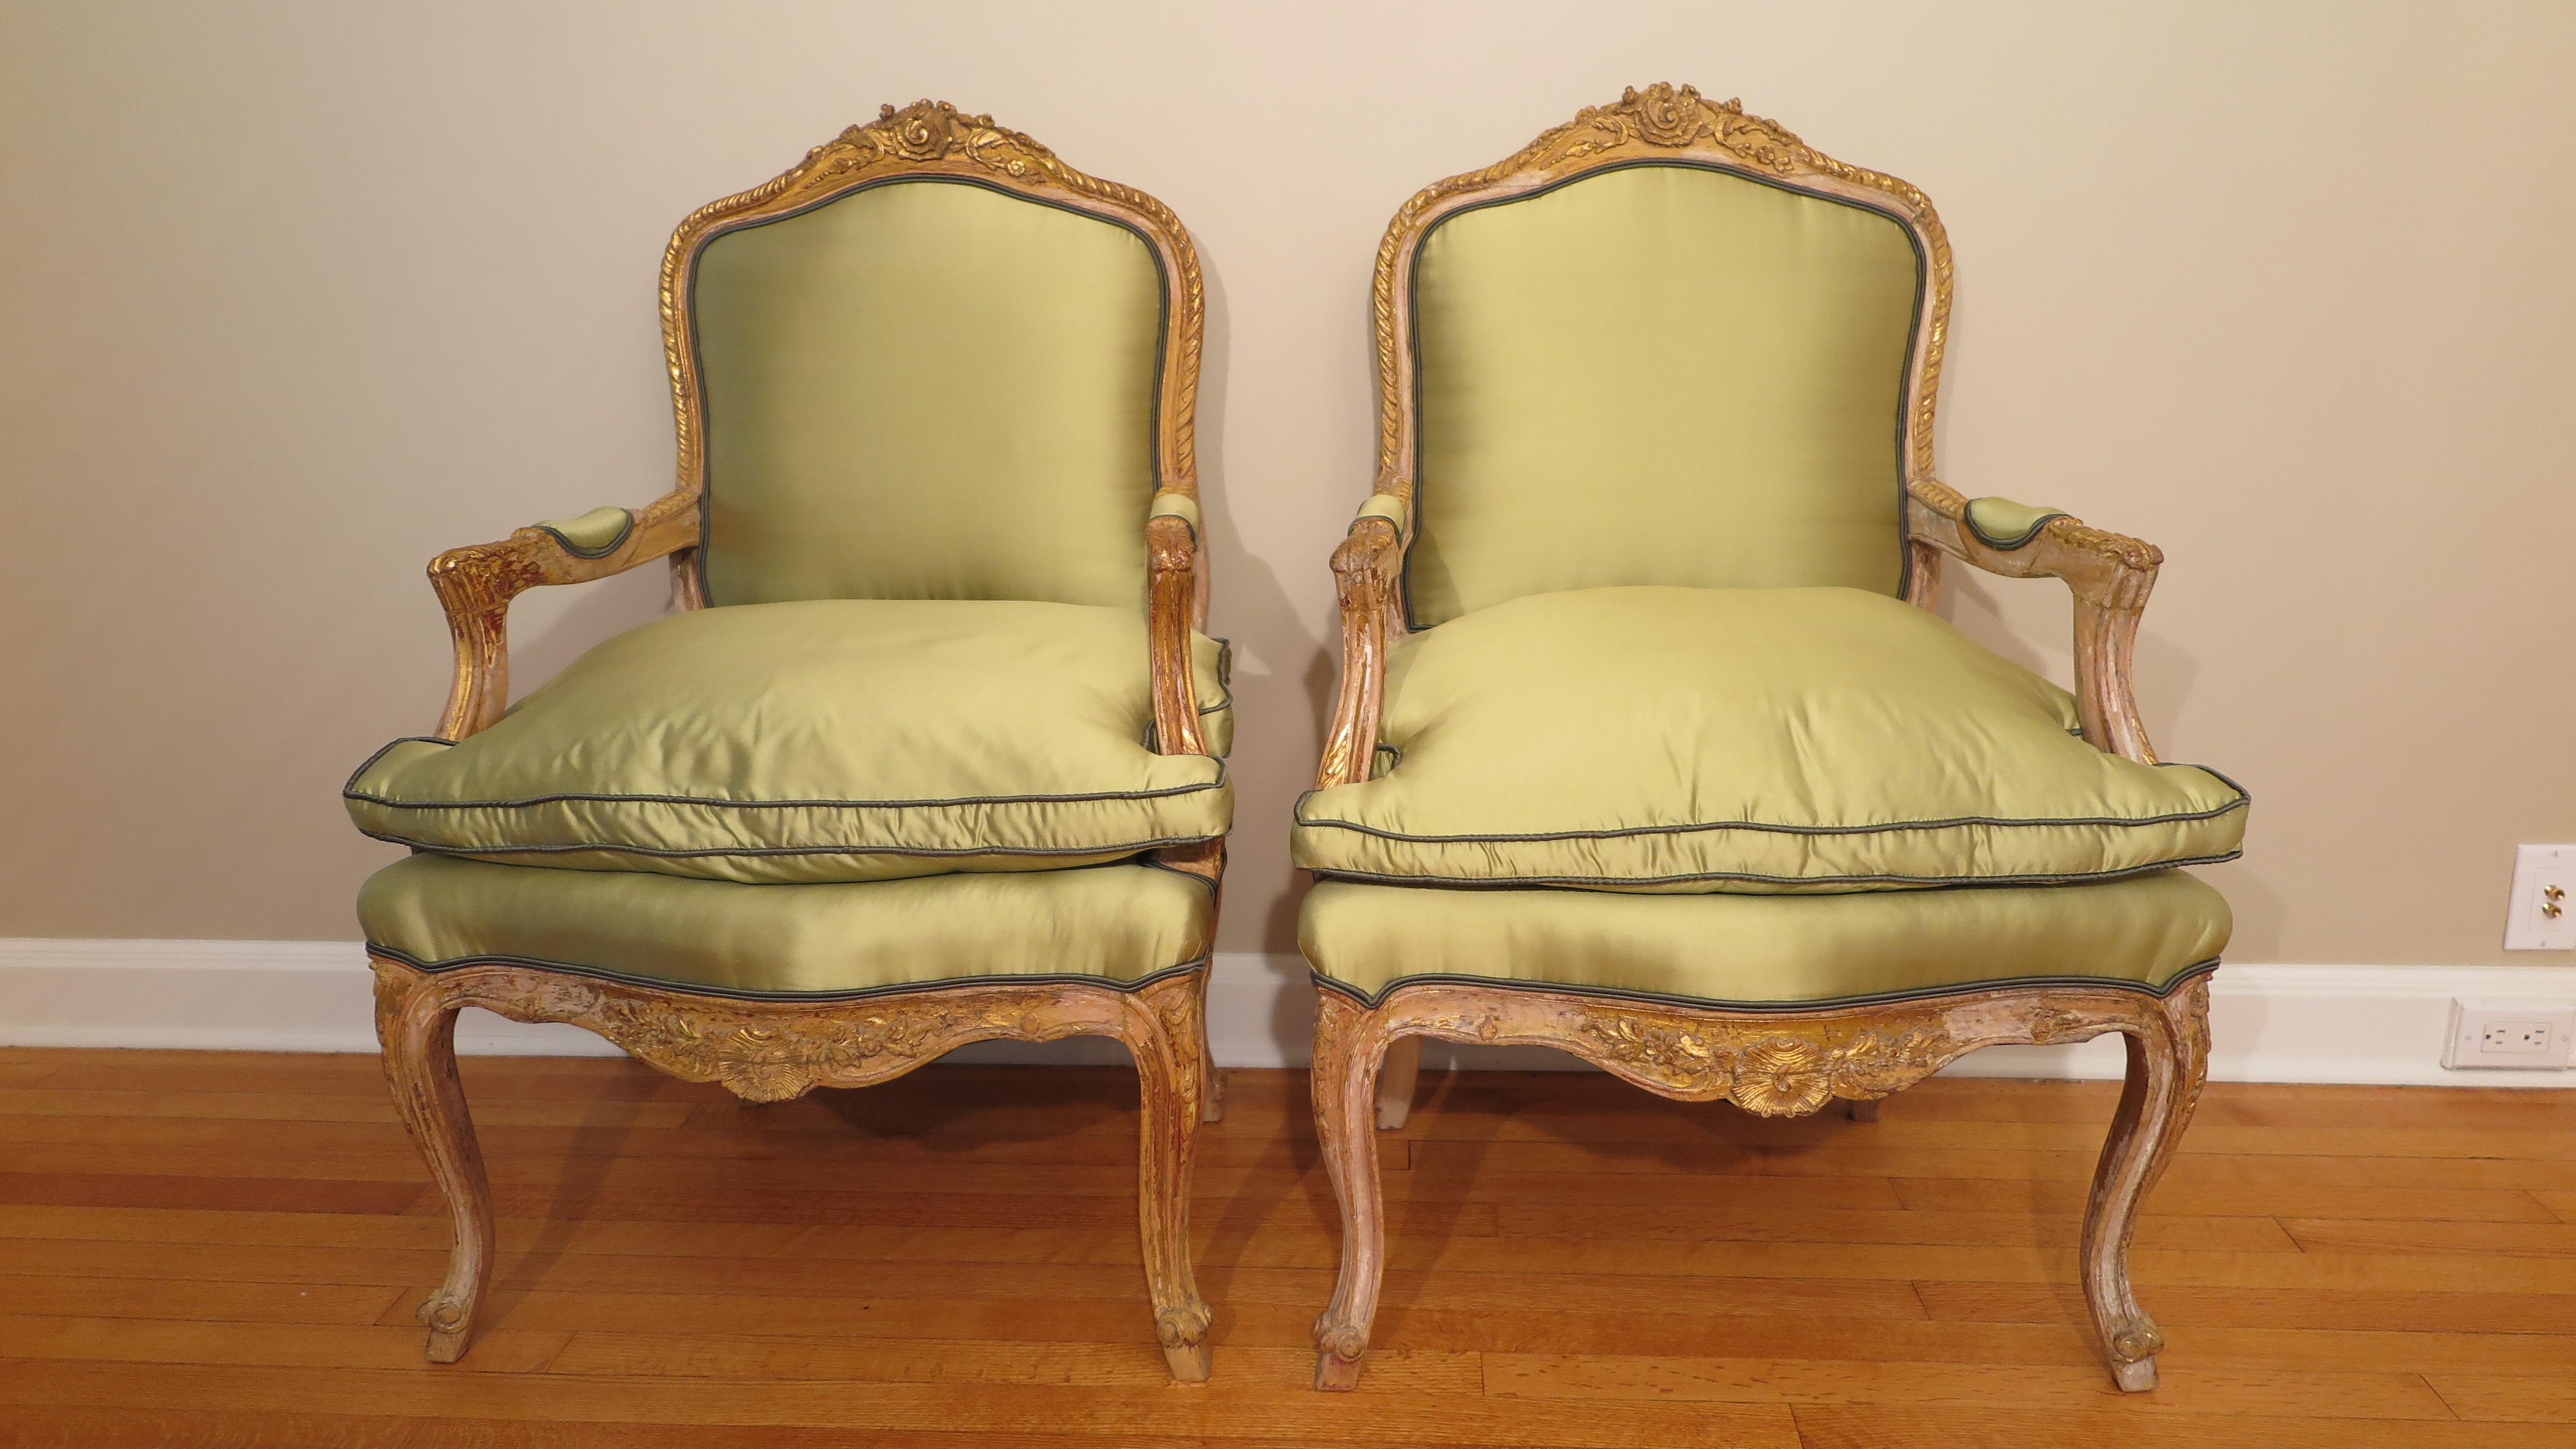 19th century French Louis XV style bergères armchairs. Very comfortable carved wood with remnants of gilding having silk covering in good condition. Beautiful addition to any room.